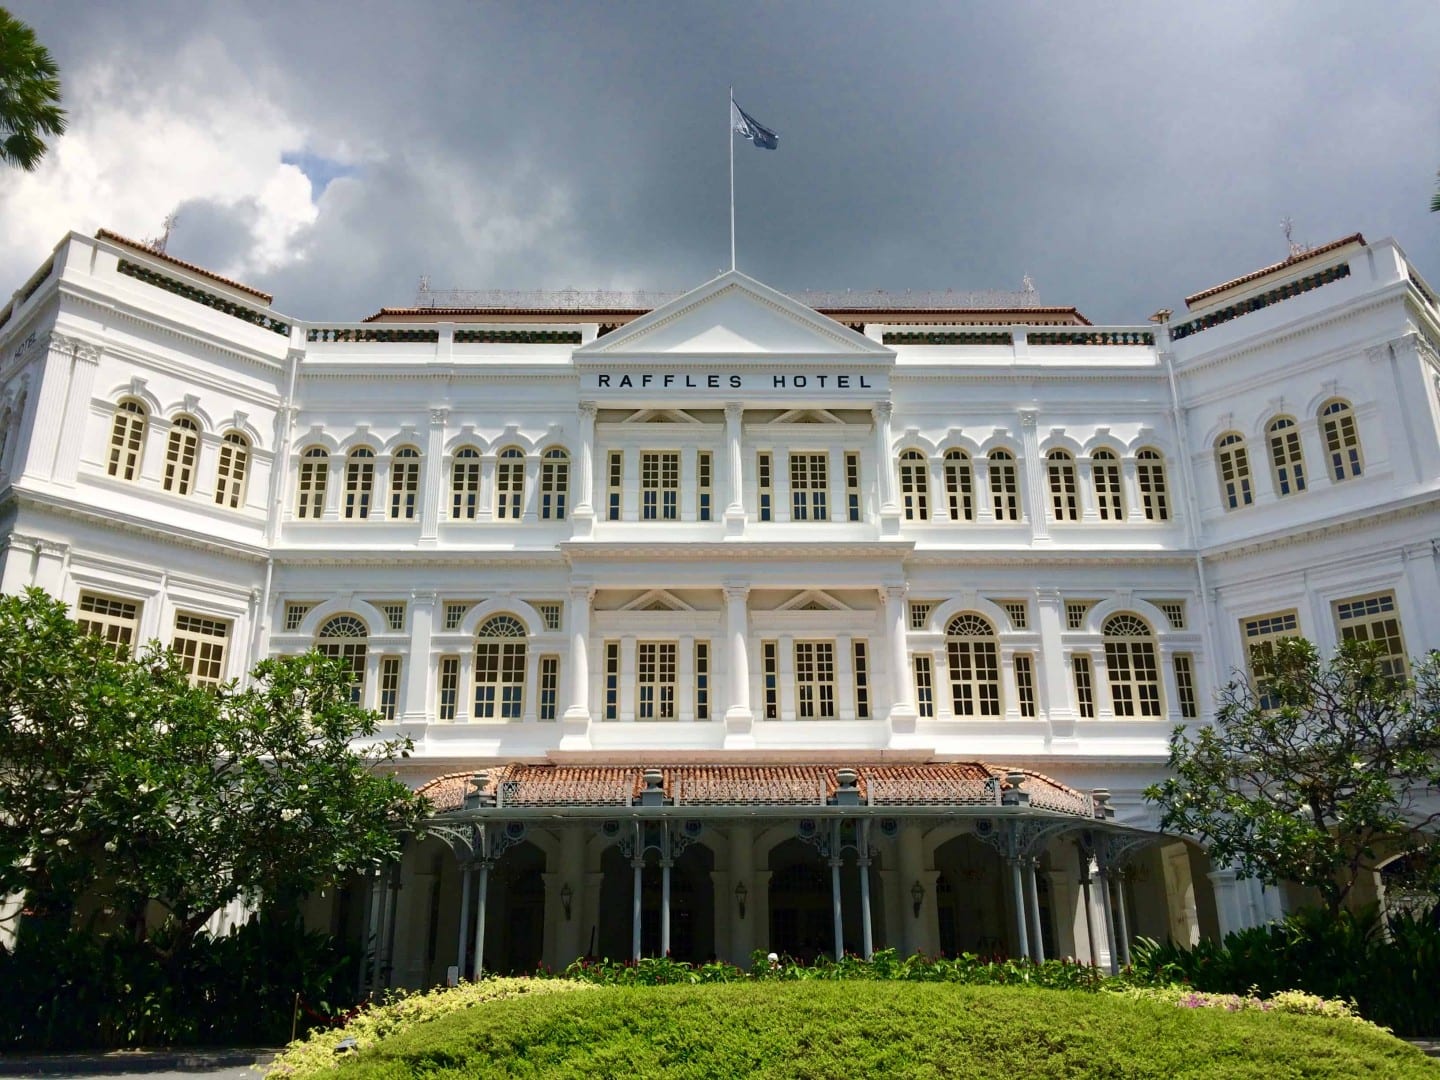 How much is a Singapore Sling at Raffles hotel?